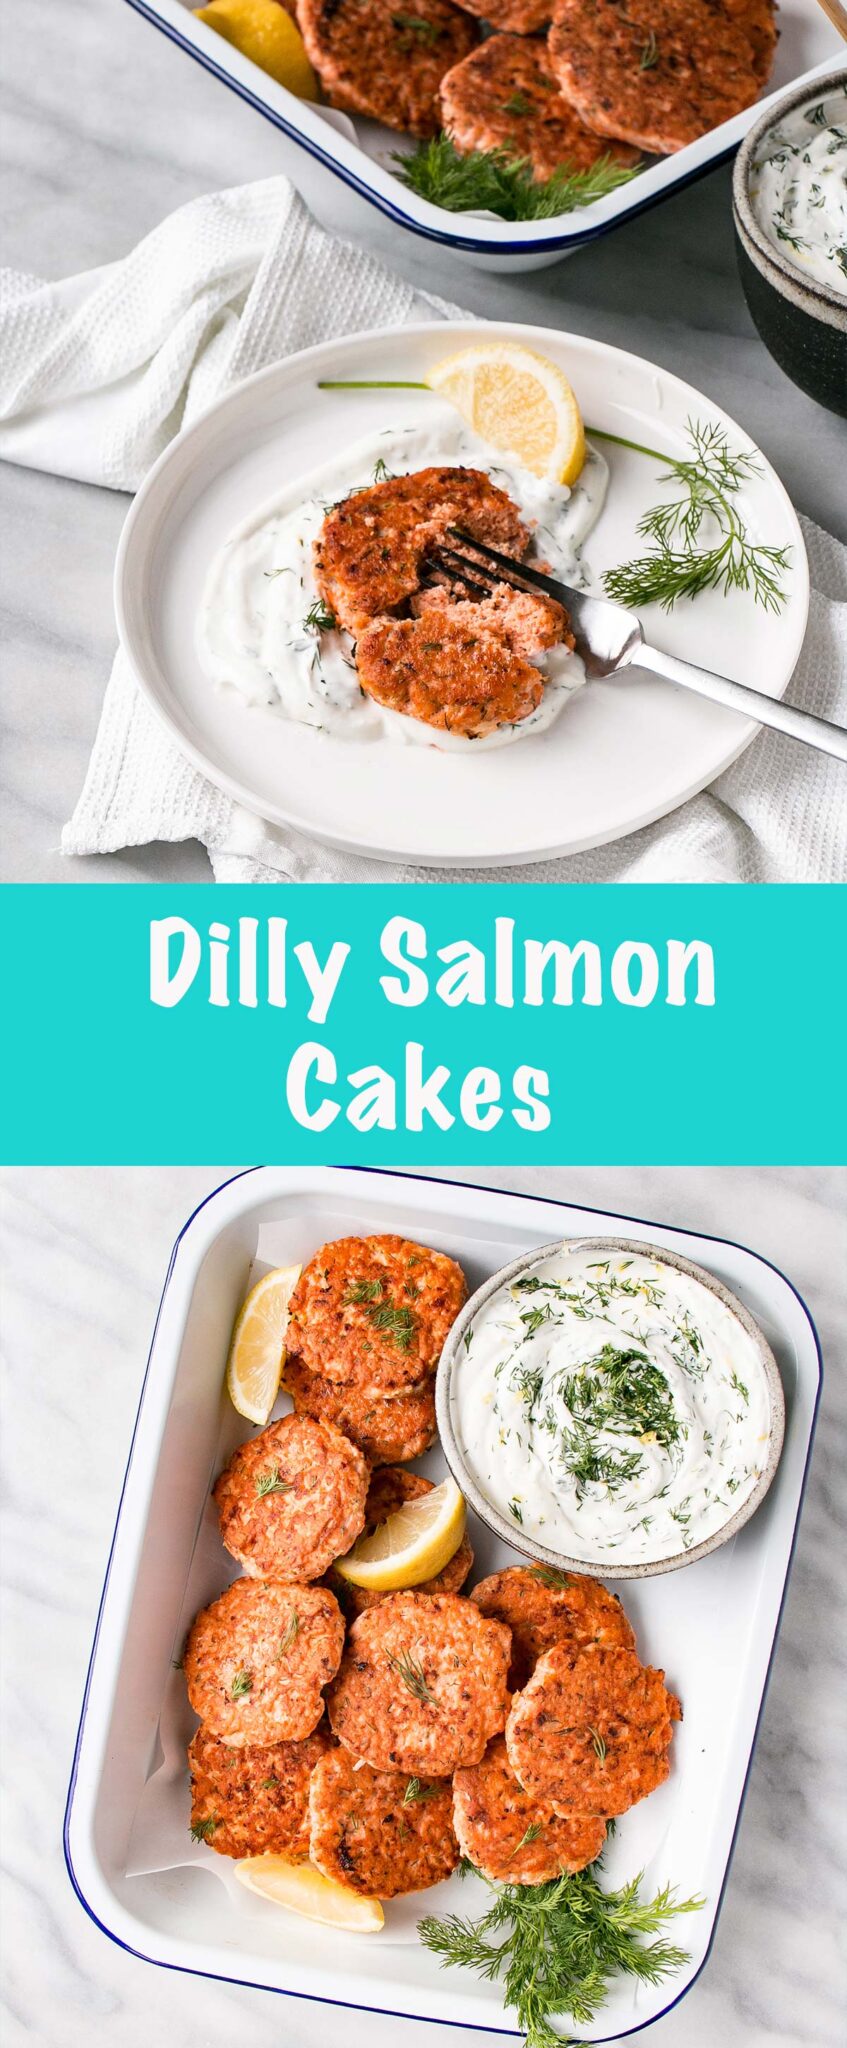 Dilly Salmon Cakes are a fast and satisfying dinner. Serve with rice, french fries, and a quick cooking vegetable for a speedy dinner everyone will love! #salmon #healthy #mealprep